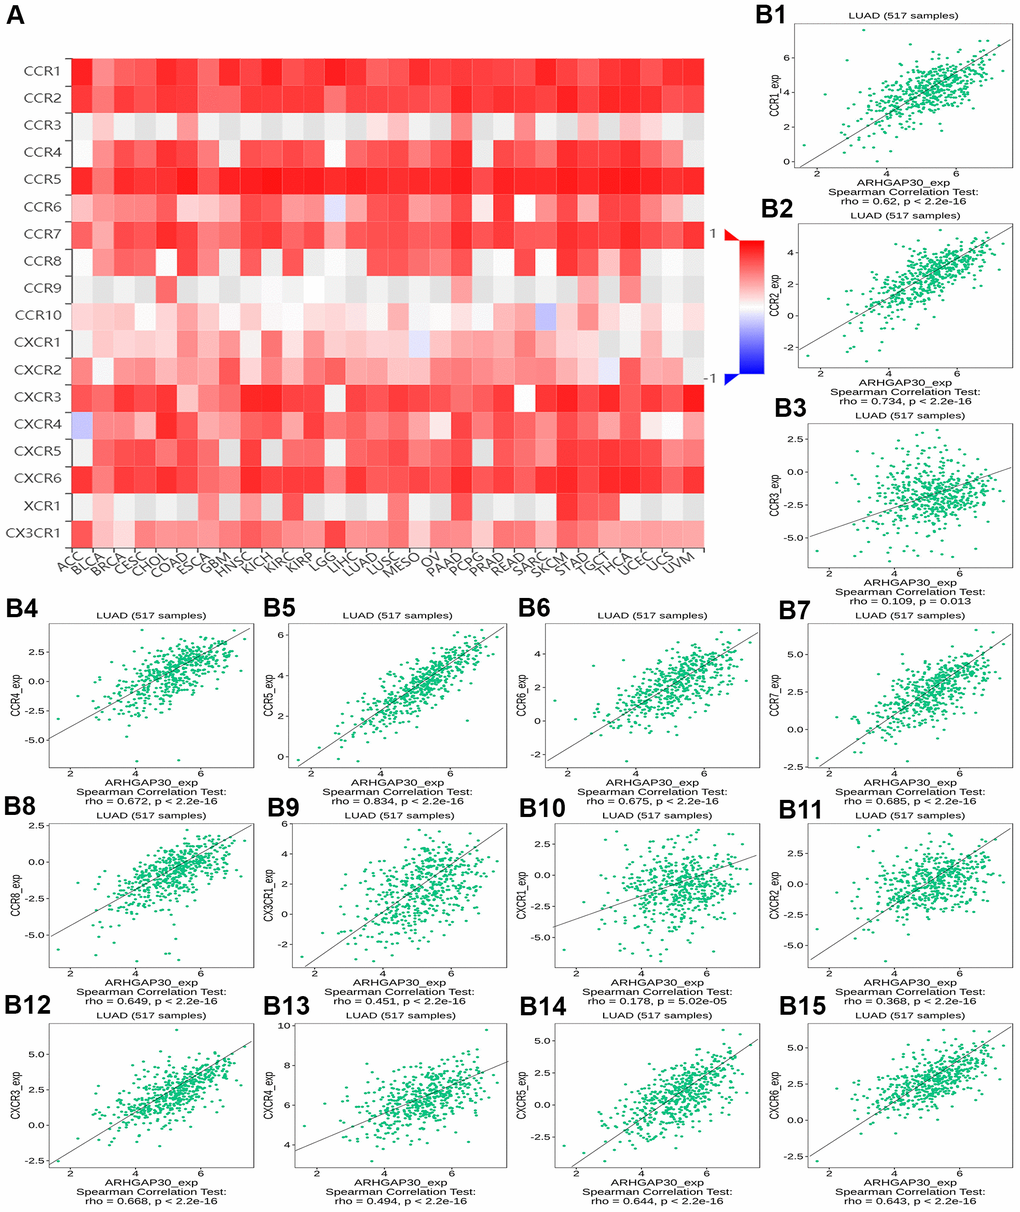 The correlation between the expression of ARHGAP30 and immunostimulators. (A) Heat map of Spearman correlations between ARHGAP30 expression and immunostimulators across human cancers. (B1–B15) Scatter plots showing the positive correlation between ARHGAP30 expression and immunostimulators in the treatment of lung adenocarcinoma.